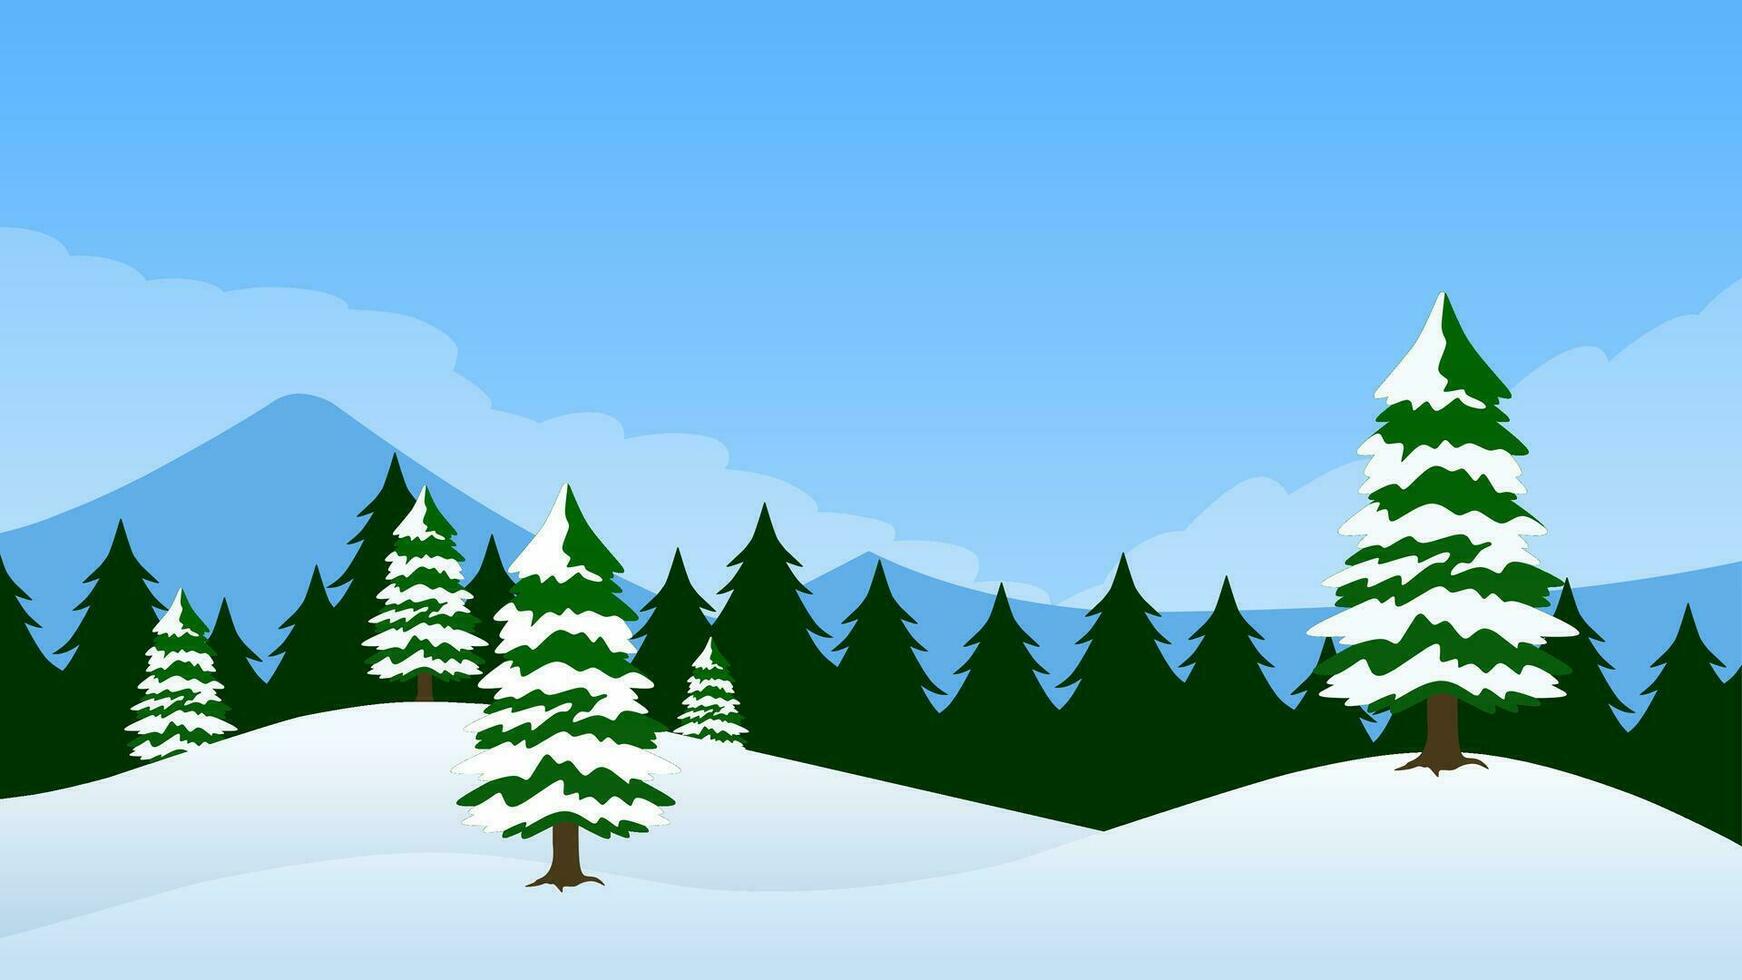 Winter pine forest landscape vector illustration. Scenery of snow covered coniferous in cold season. Snowy pine forest landscape for background, wallpaper or christmas